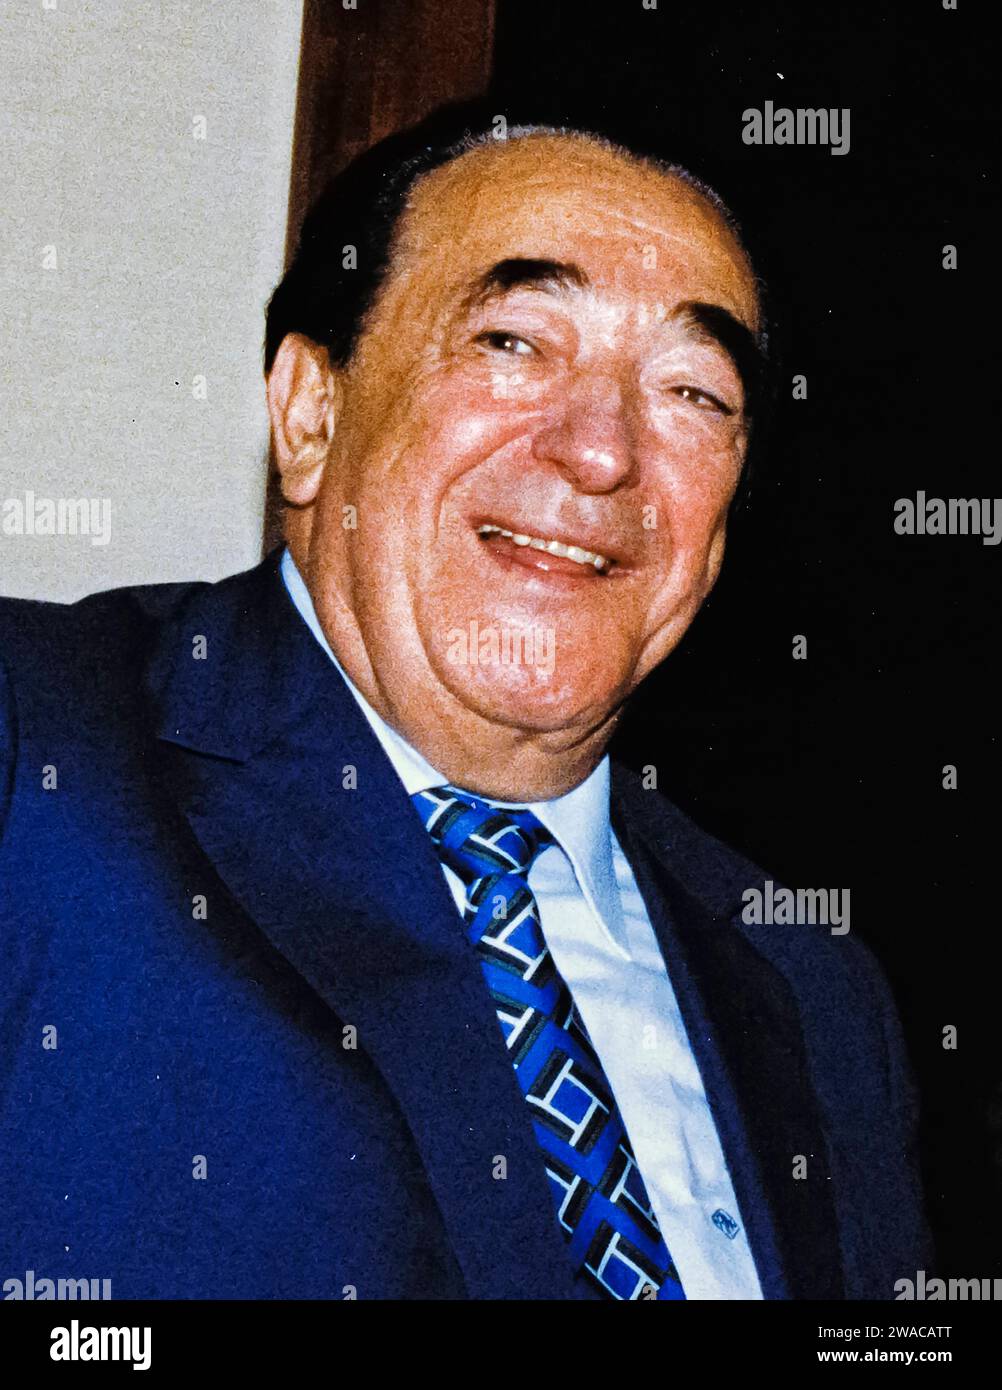 **FILE PHOTO** Court Records On Jeffrey Epstein Case Set To Be Unsealed Today. In this file photo from September 25, 1990, disgraced publisher Robert Maxwell, meets South African Ambassador to the United States Piet G.J. Koornhof in Washington, DC on September 25, 1990. The New York Post is reporting today that Maxwell, through his daughter Ghislaine Maxwell, may have been the source the huge fortune amassed by alleged pedophile Jeffrey Epstein, who hanged himself in his Manhattan lockup last August. Copyright: xRonxSachsx/xCNPx/MediaPunchx Stock Photo